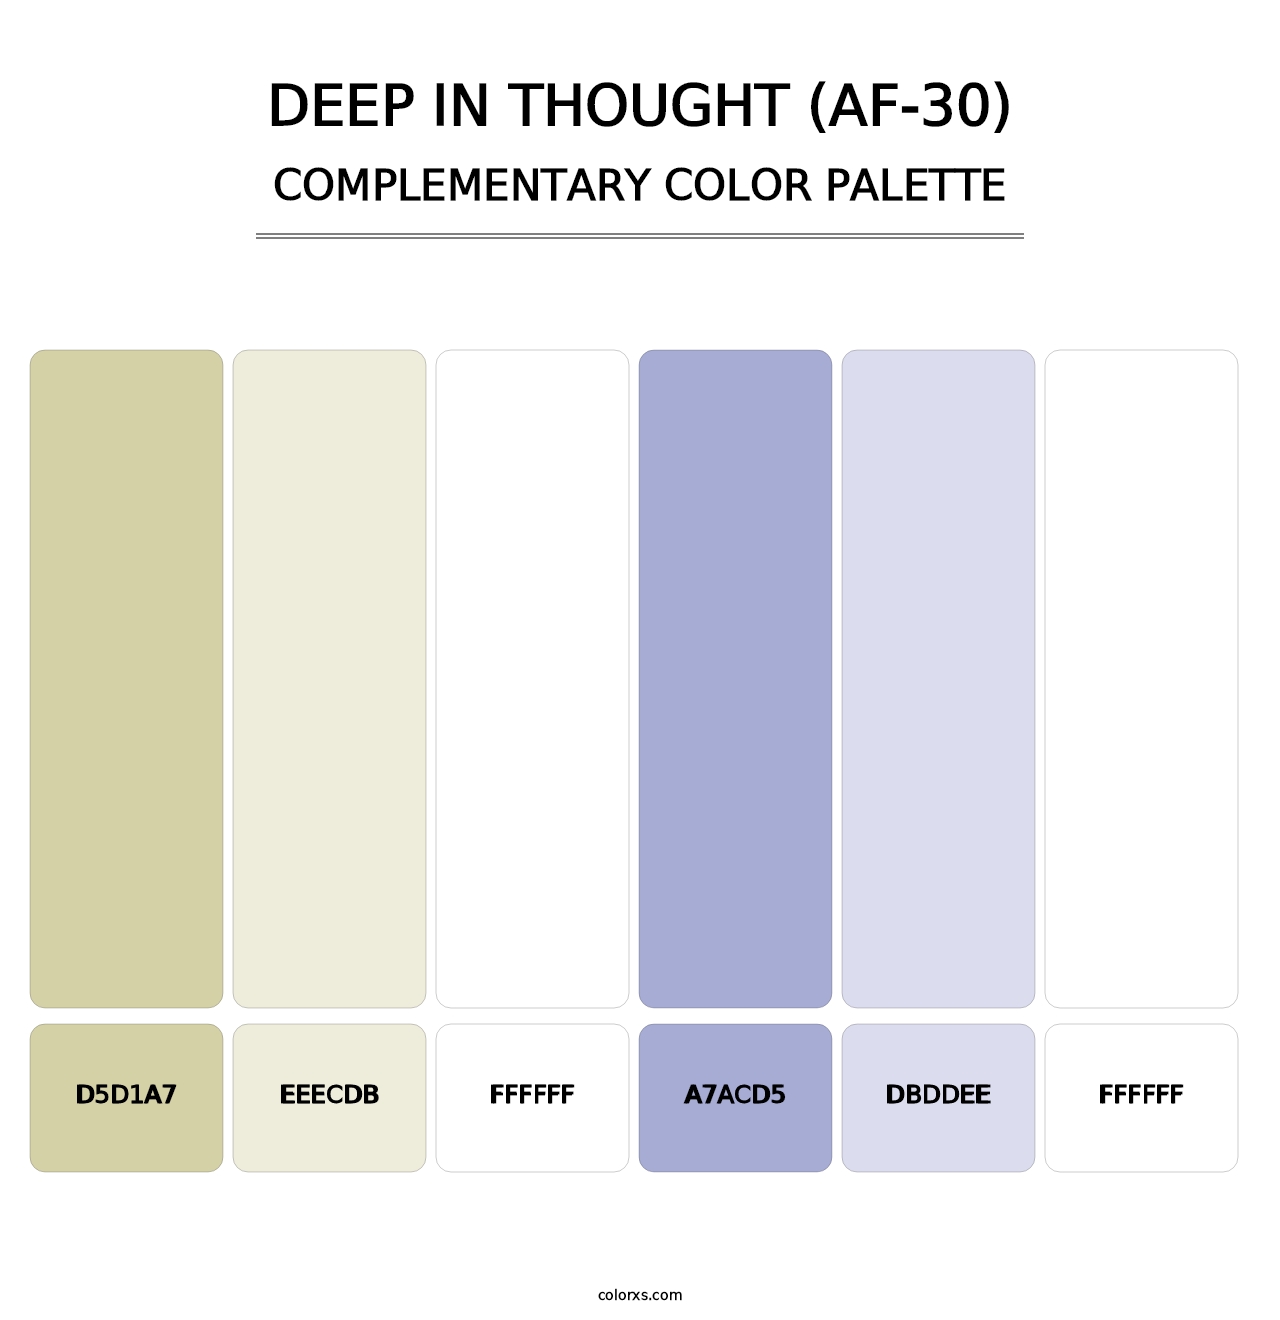 Deep in Thought (AF-30) - Complementary Color Palette